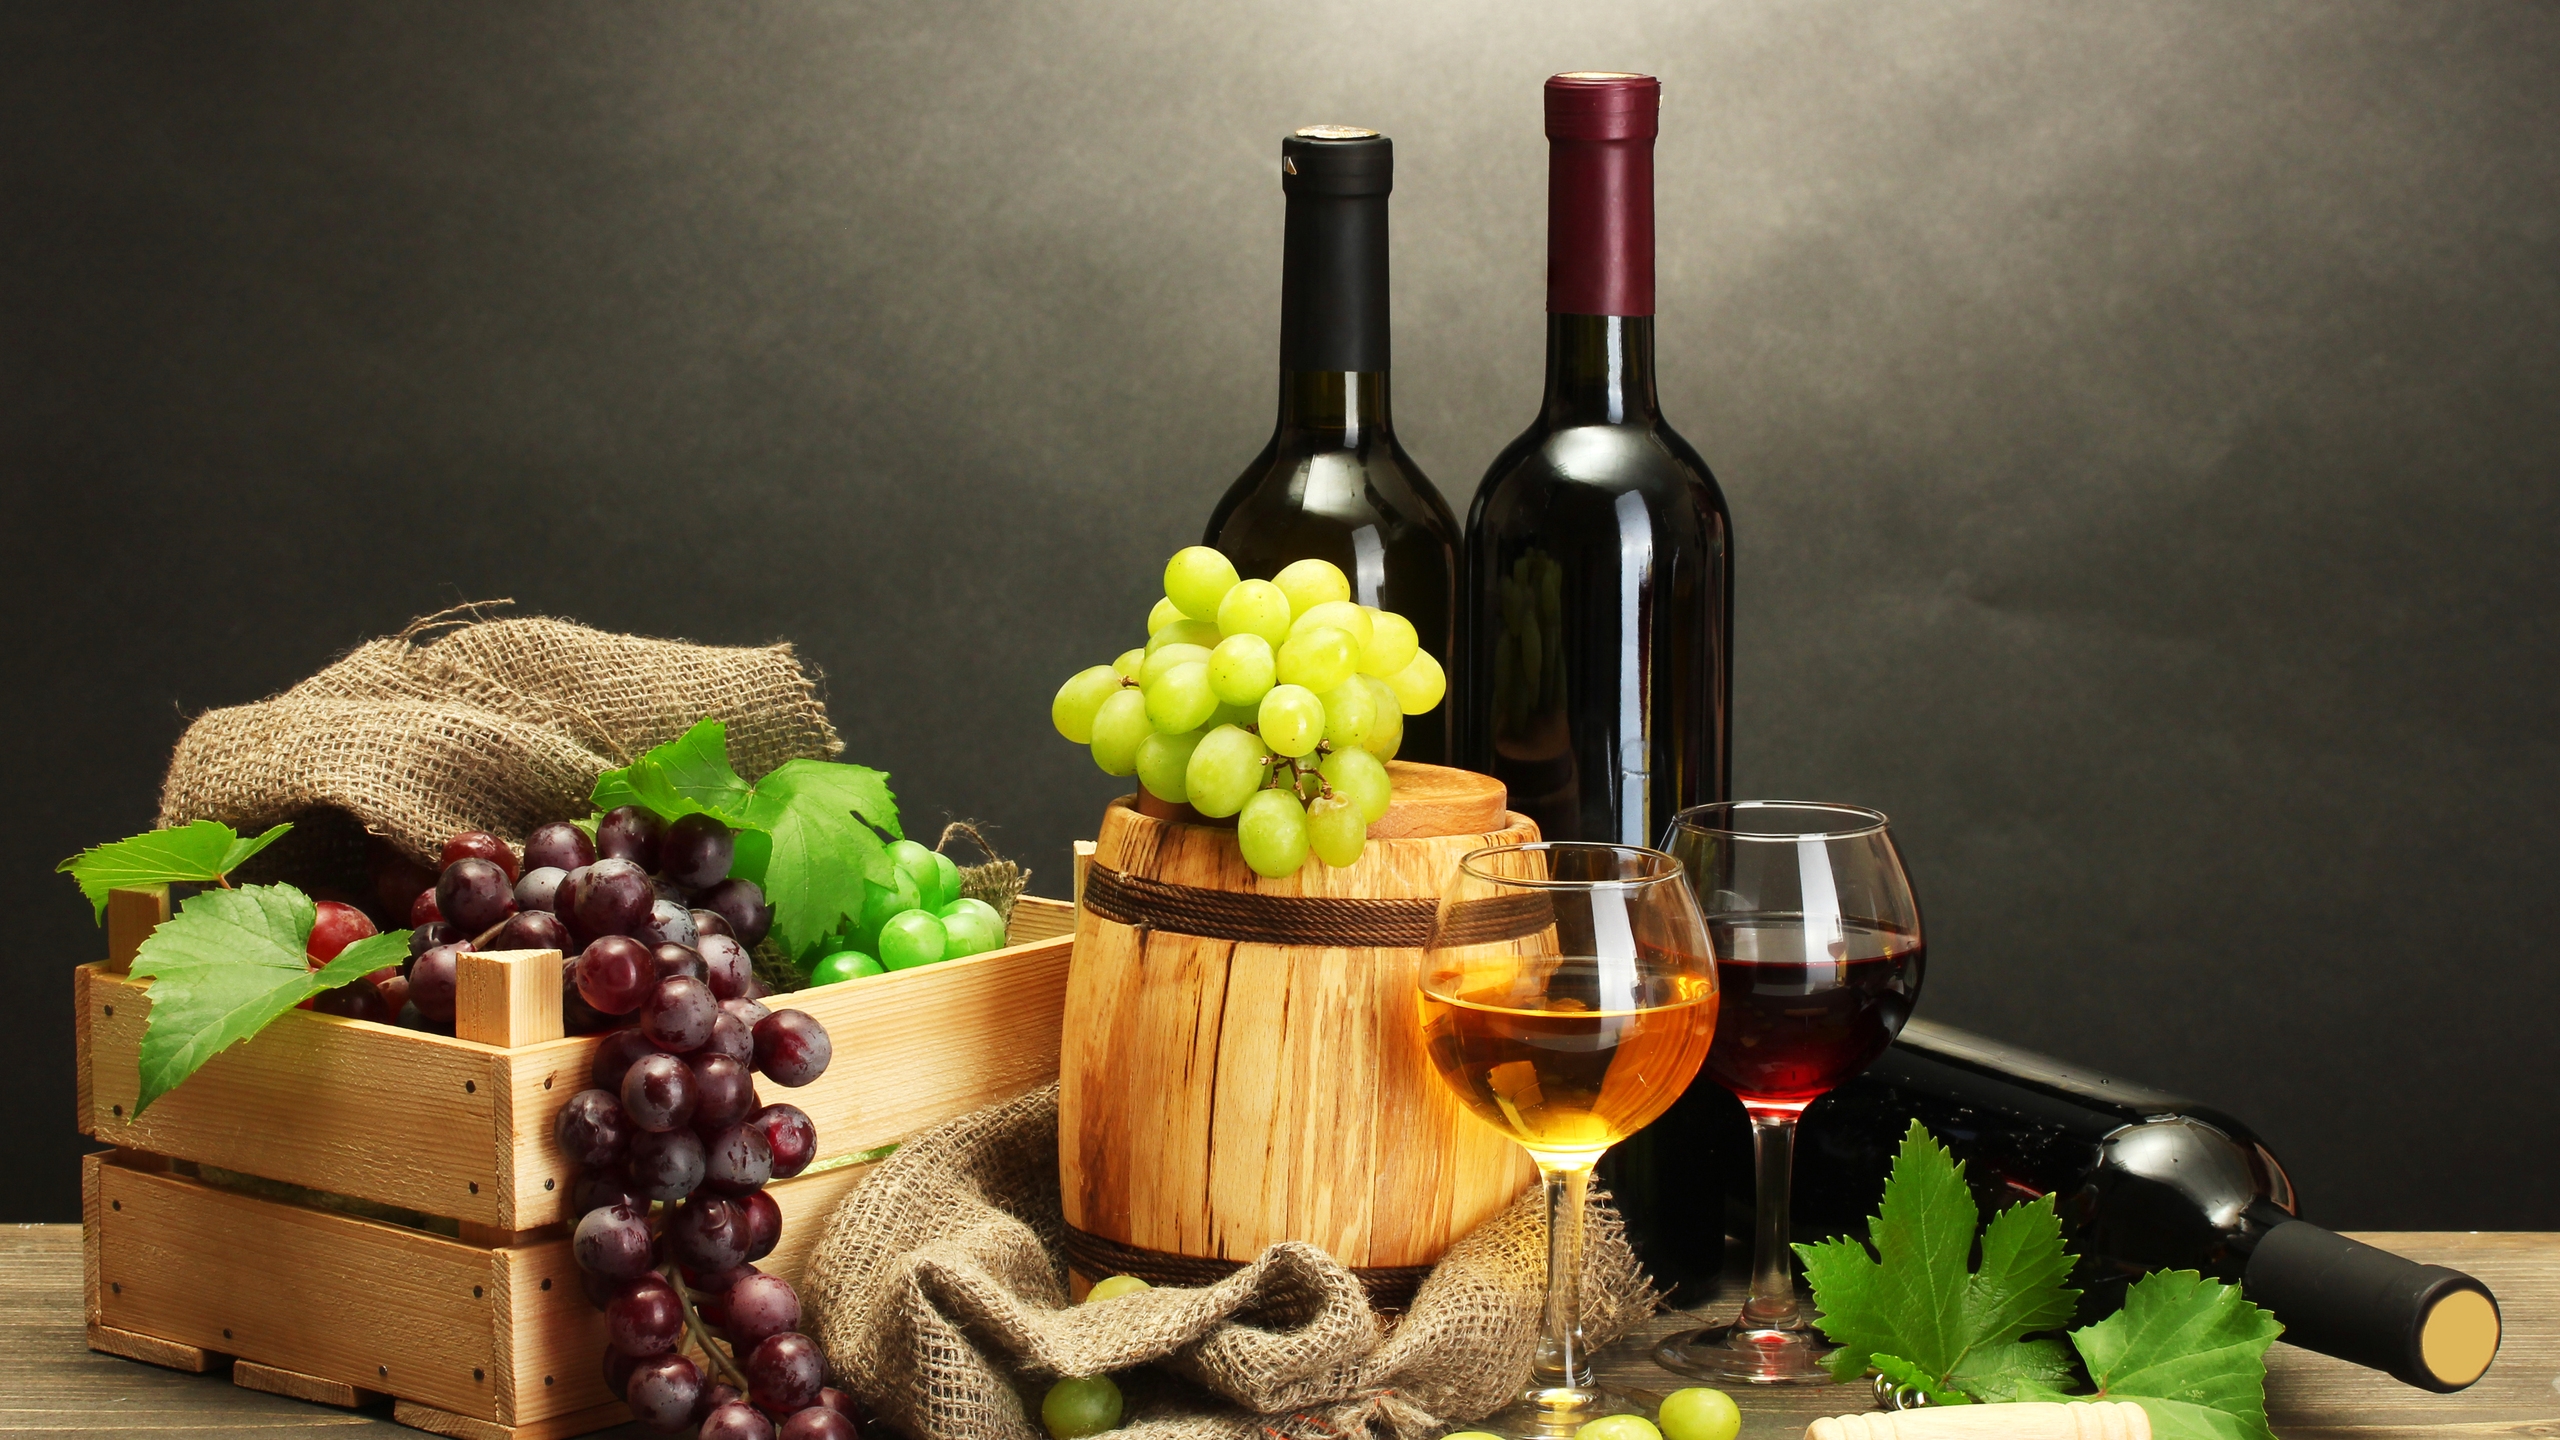 Grapes and Wine for 2560x1440 HDTV resolution